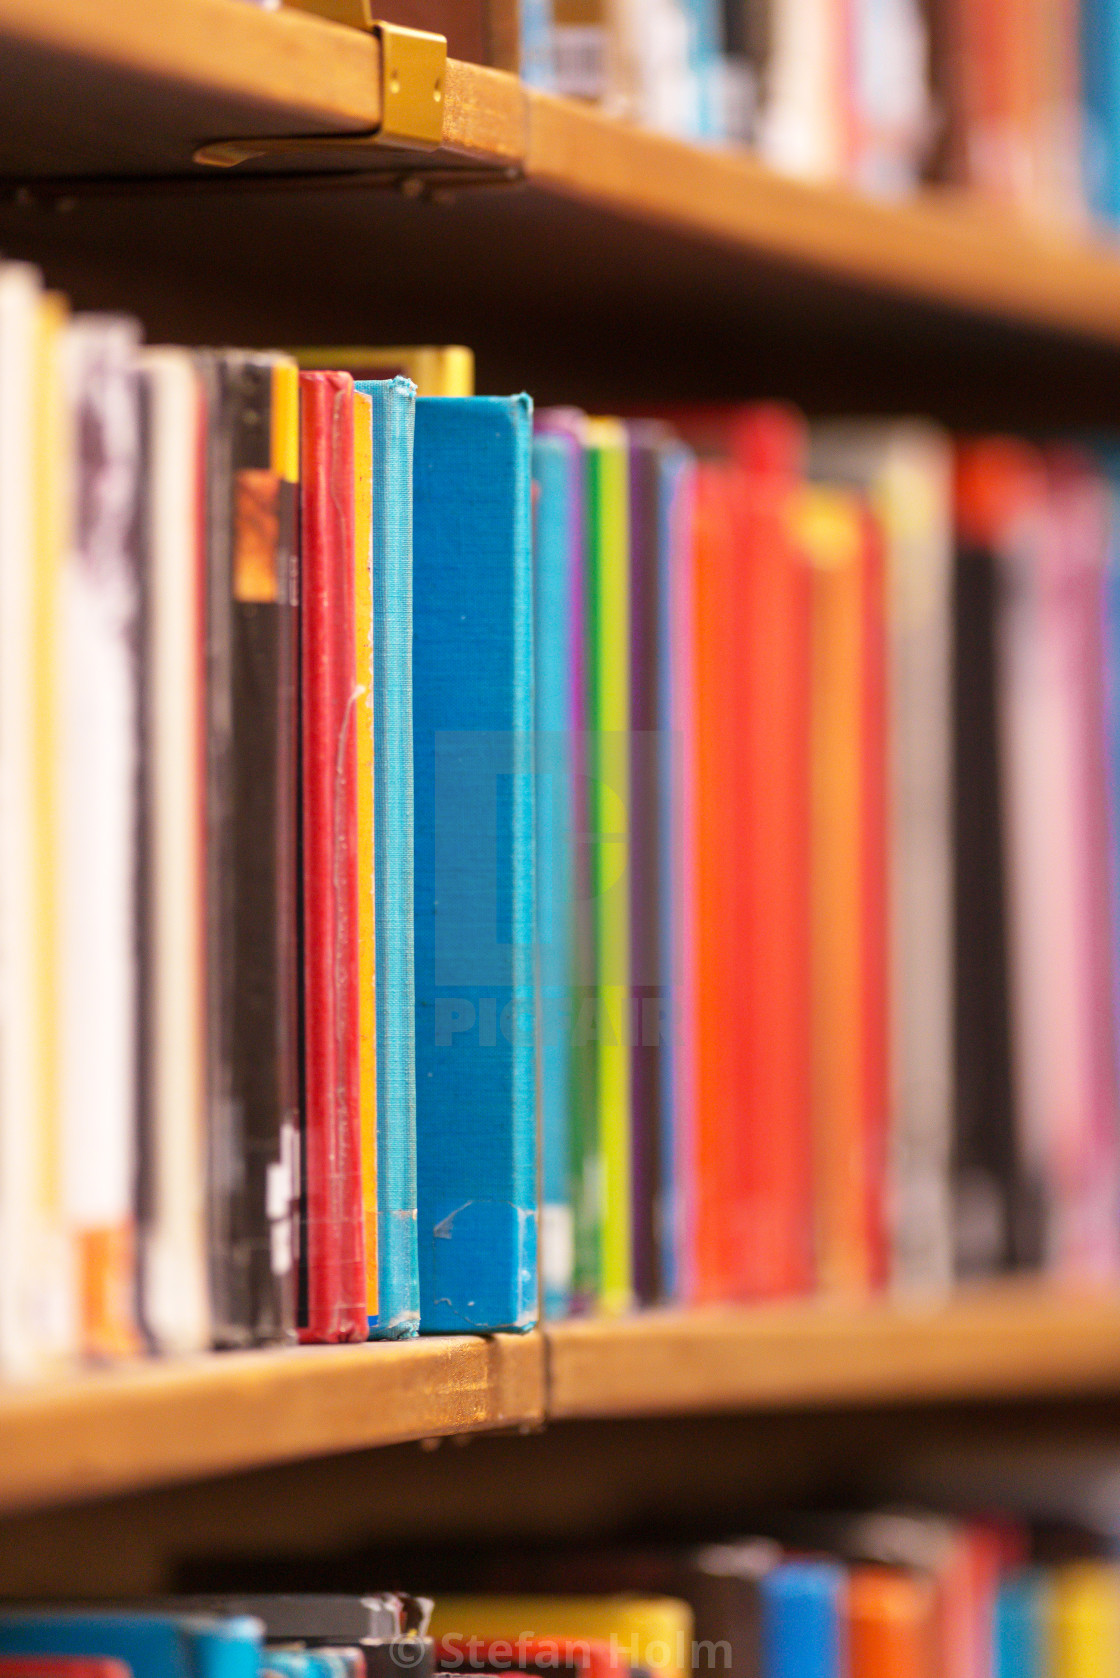 "Colorful books on the shelfs with shallow depth of field at the" stock image